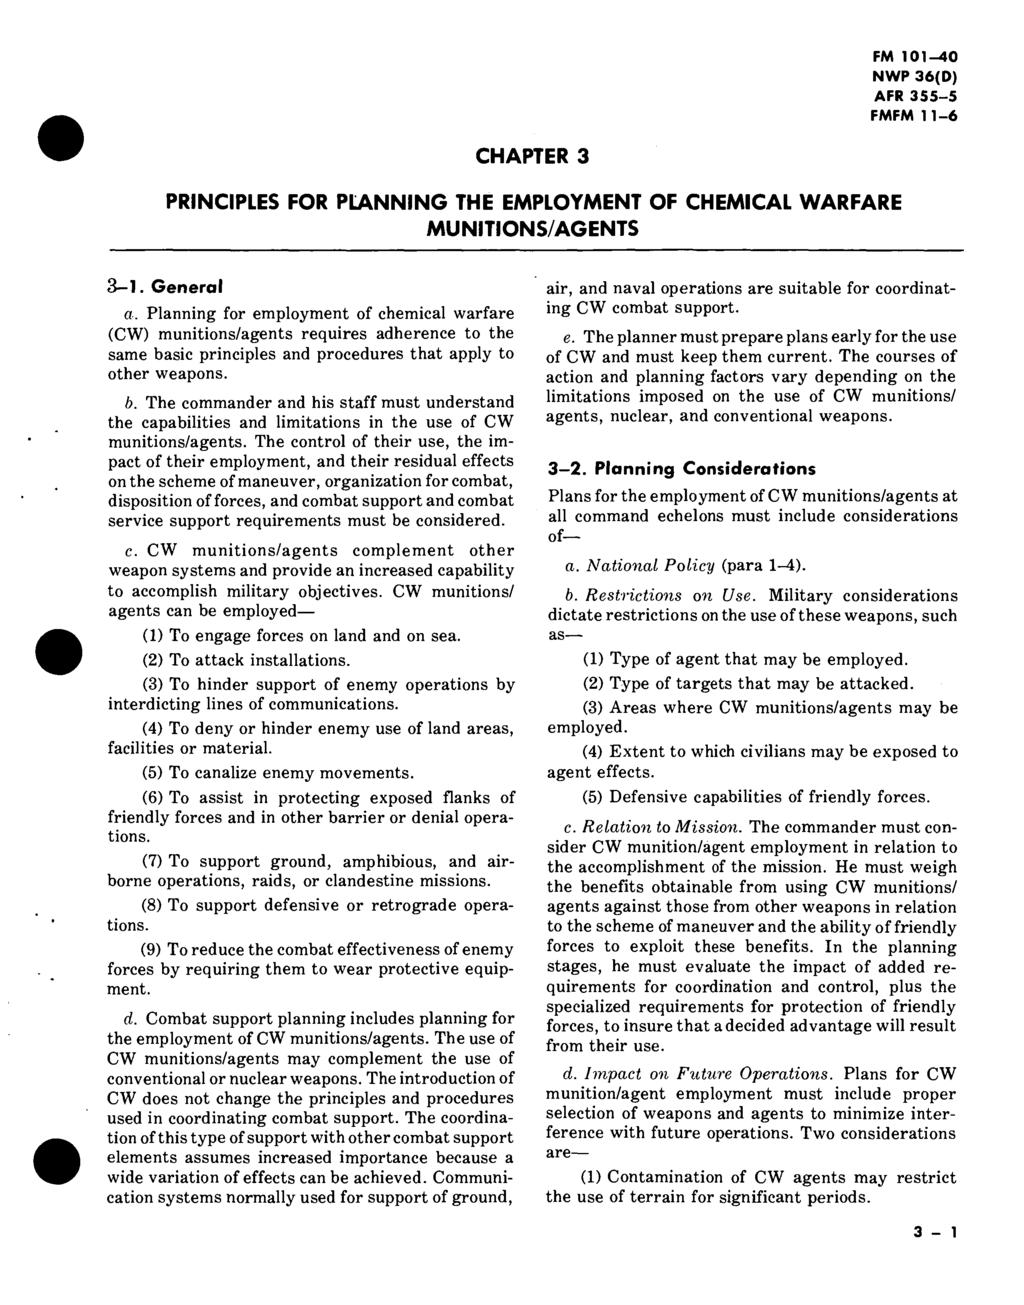 CHAPTER 3 PRINCIPLES FOR PLANNING THE EMPLOYMENT OF CHEMICAL WARFARE MUNITIONS/AGENTS 3-1. General a.